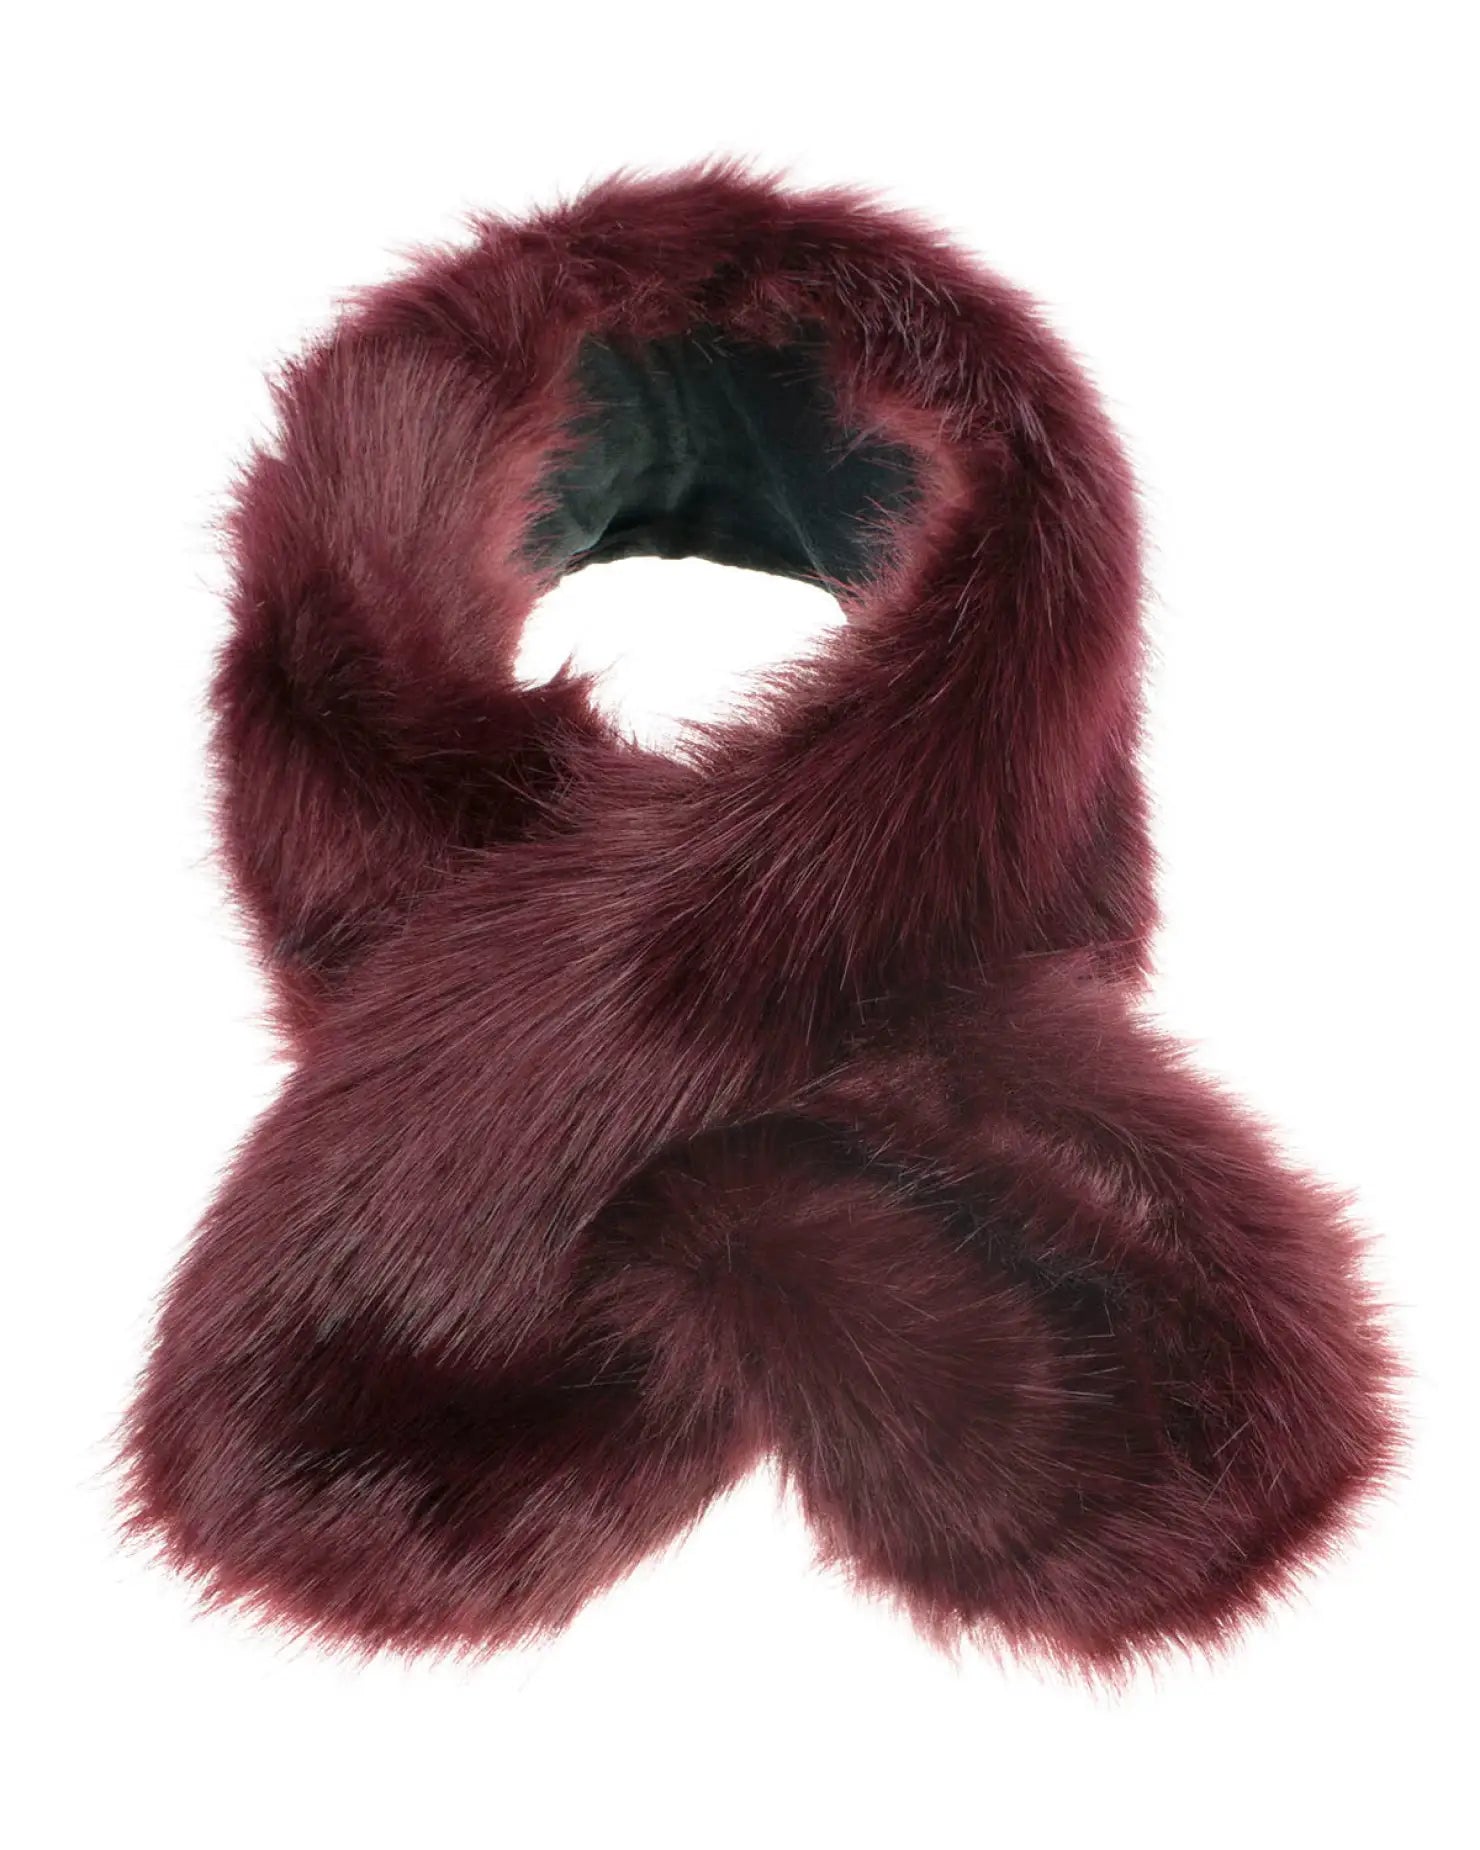 Burgundy faux fur scarf with black leather handle from Fluffy Faux Fur Collar Tippet Wrap Scarf with Suede Lining